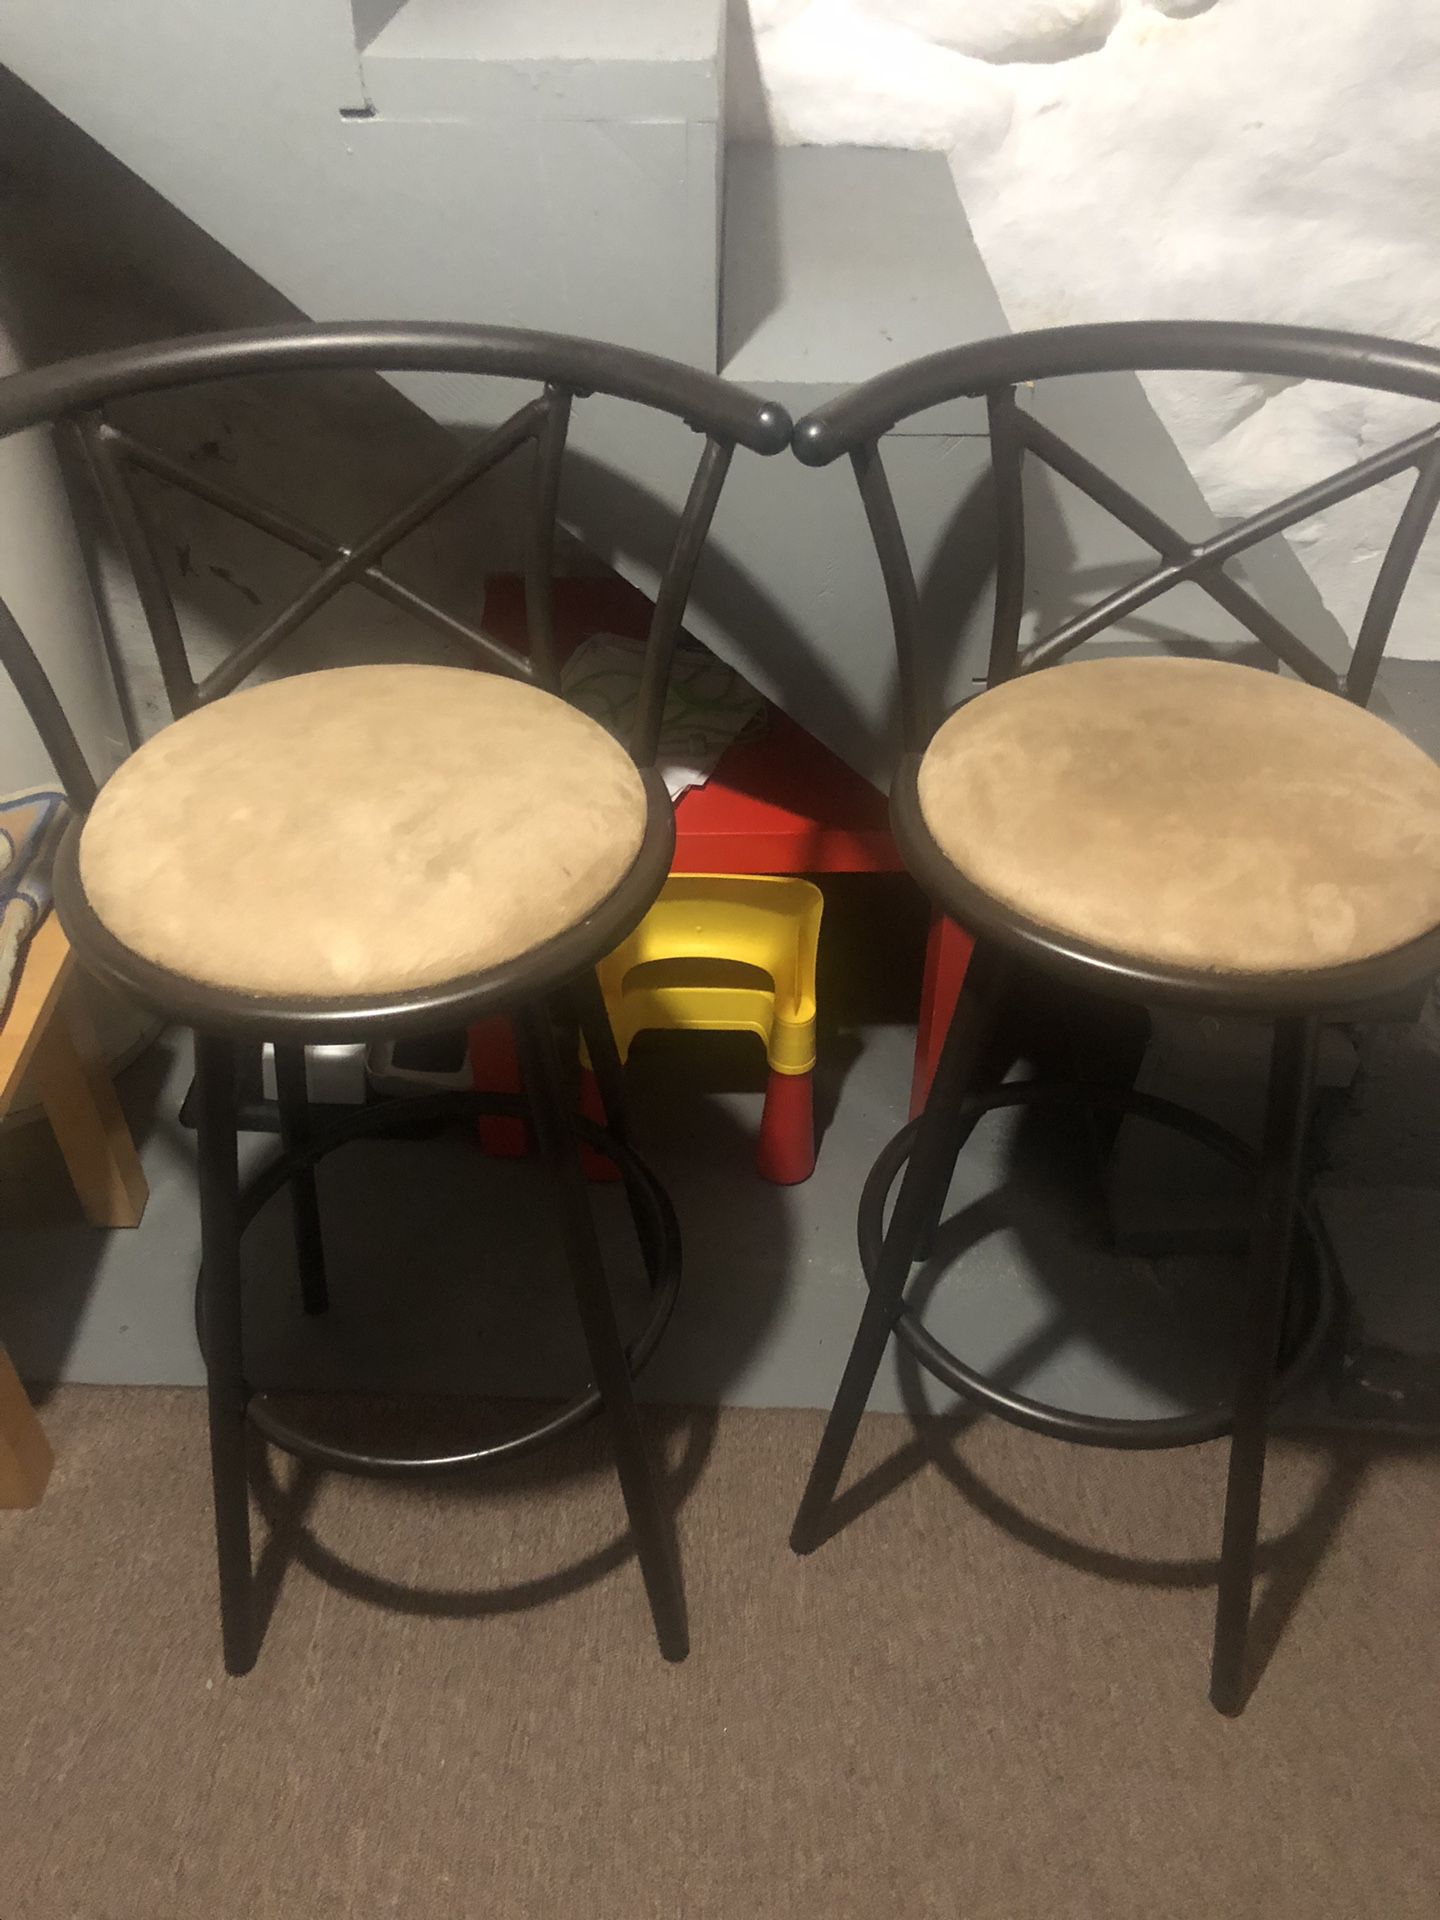 Two Matching Stools